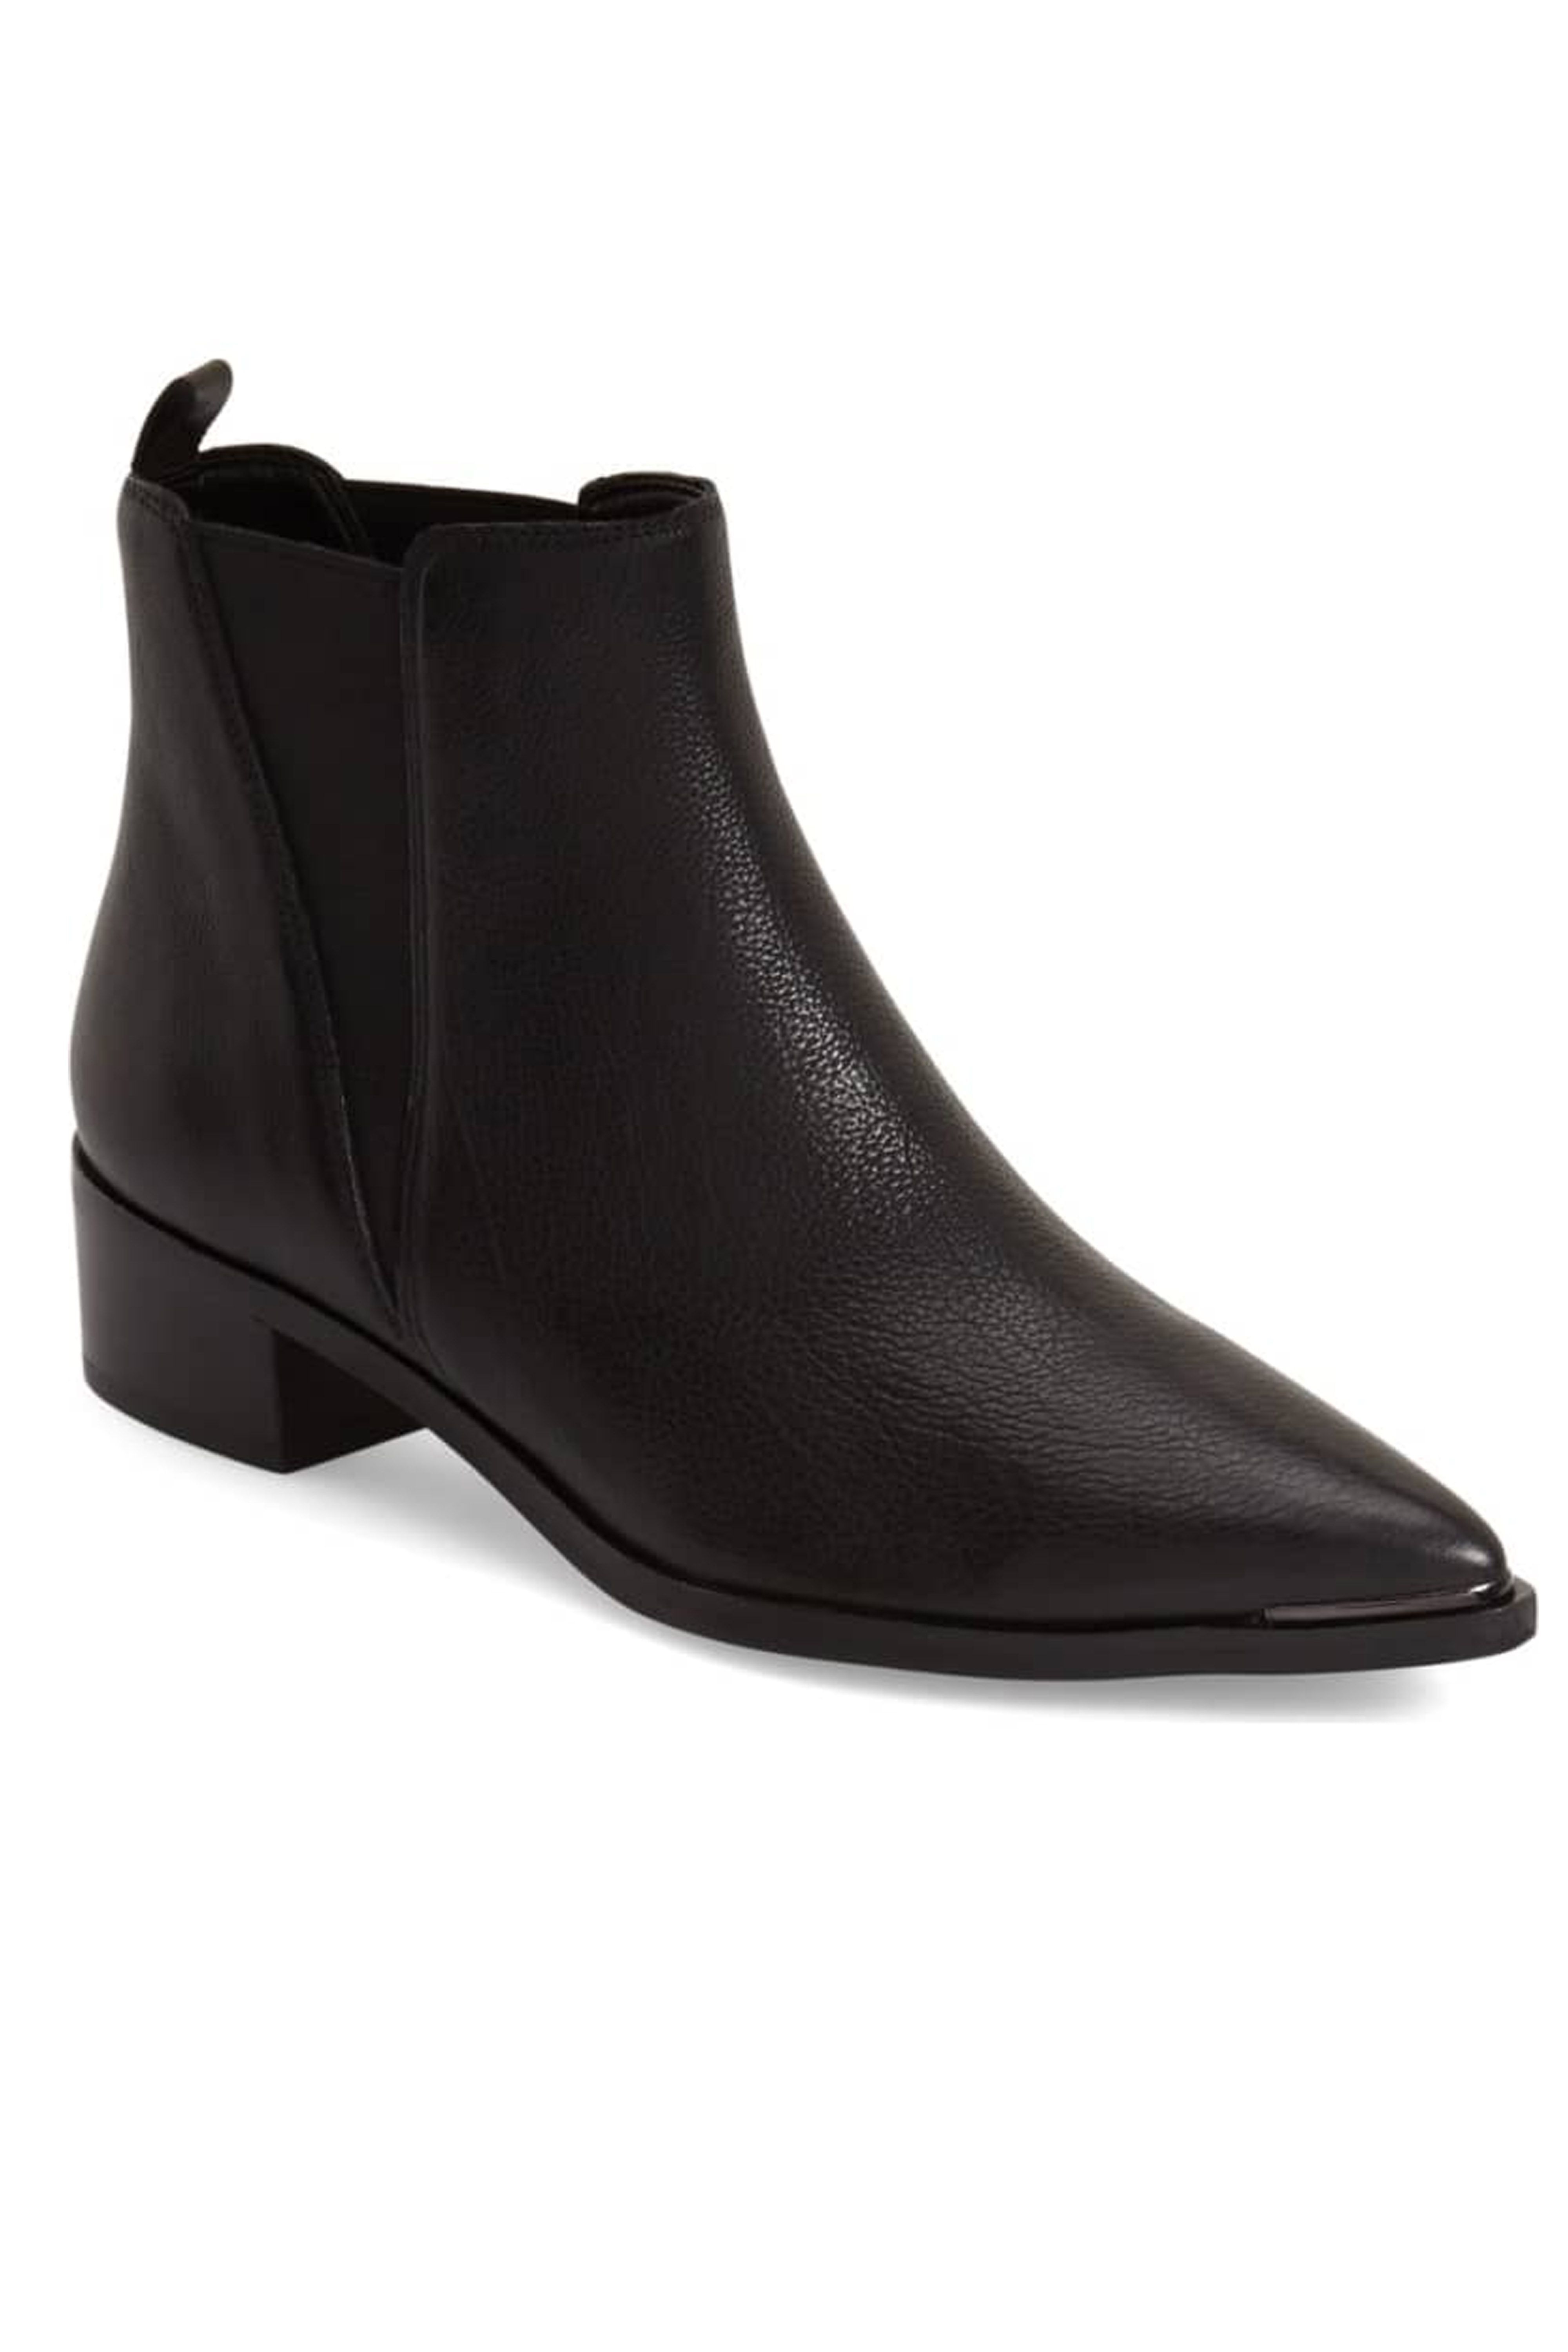 'Yale' Chelsea Boot